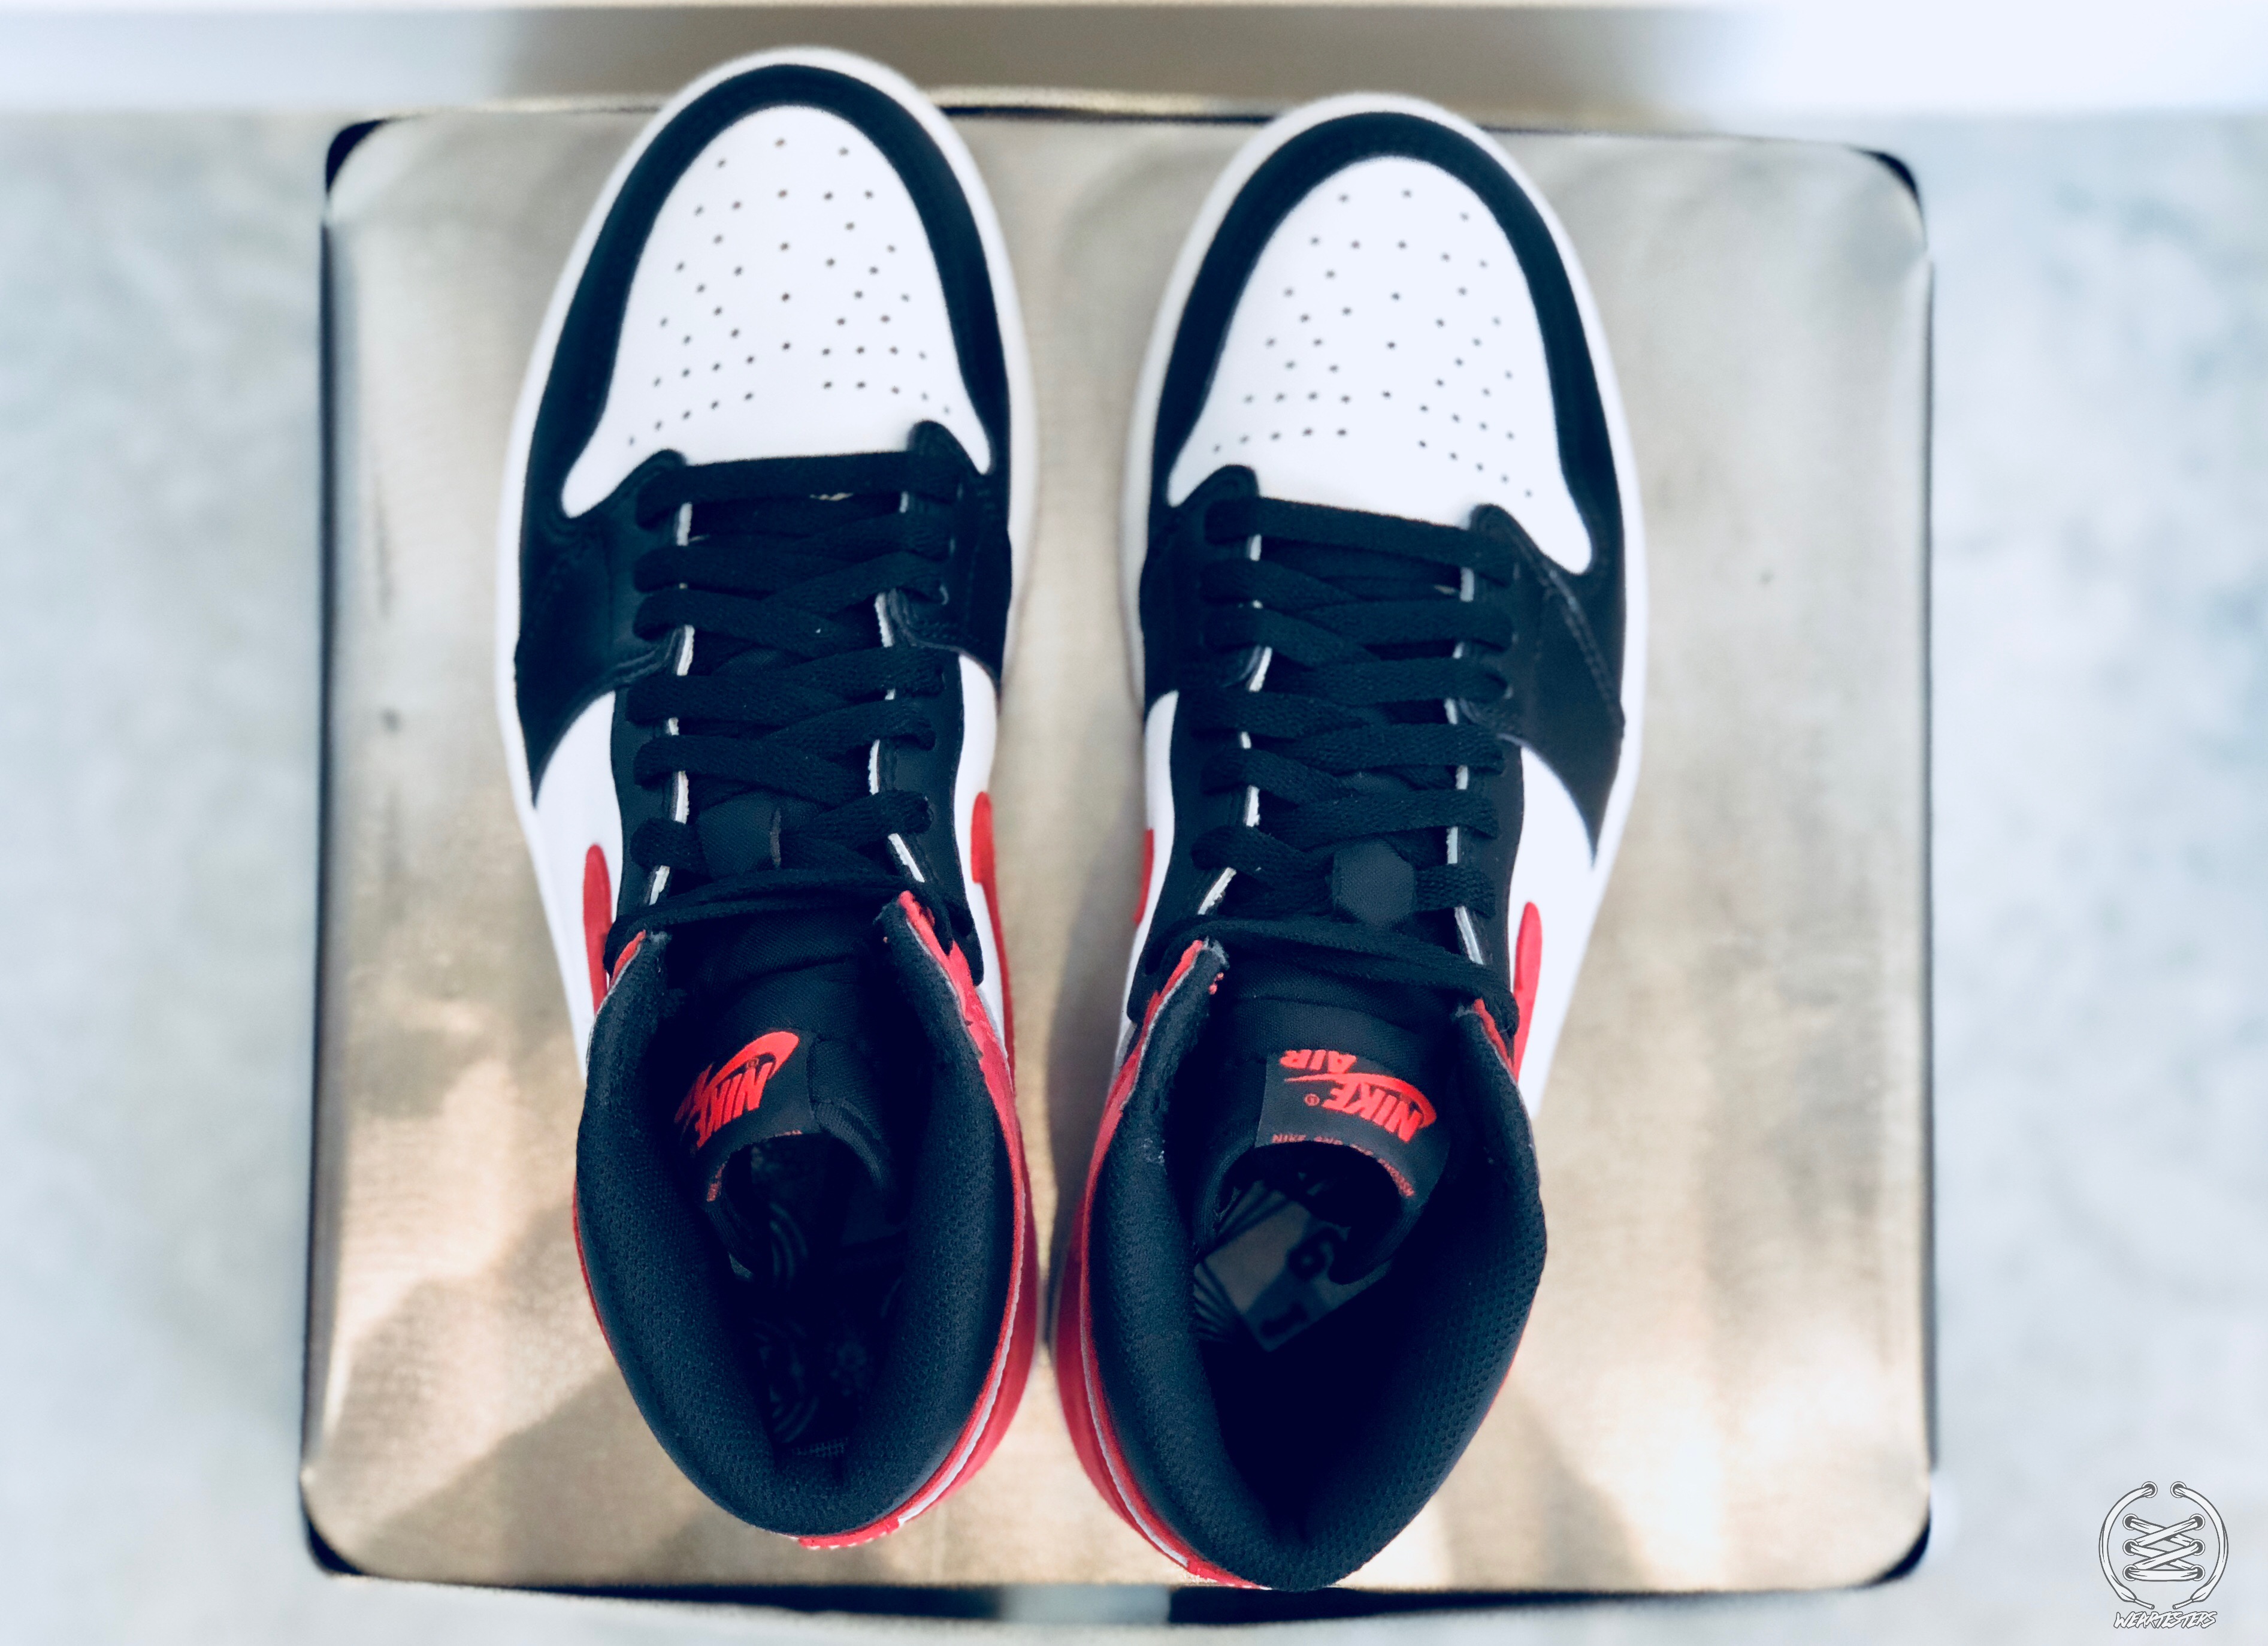 Air Jordan 1 Track Red Best Hand in the Game collection 2